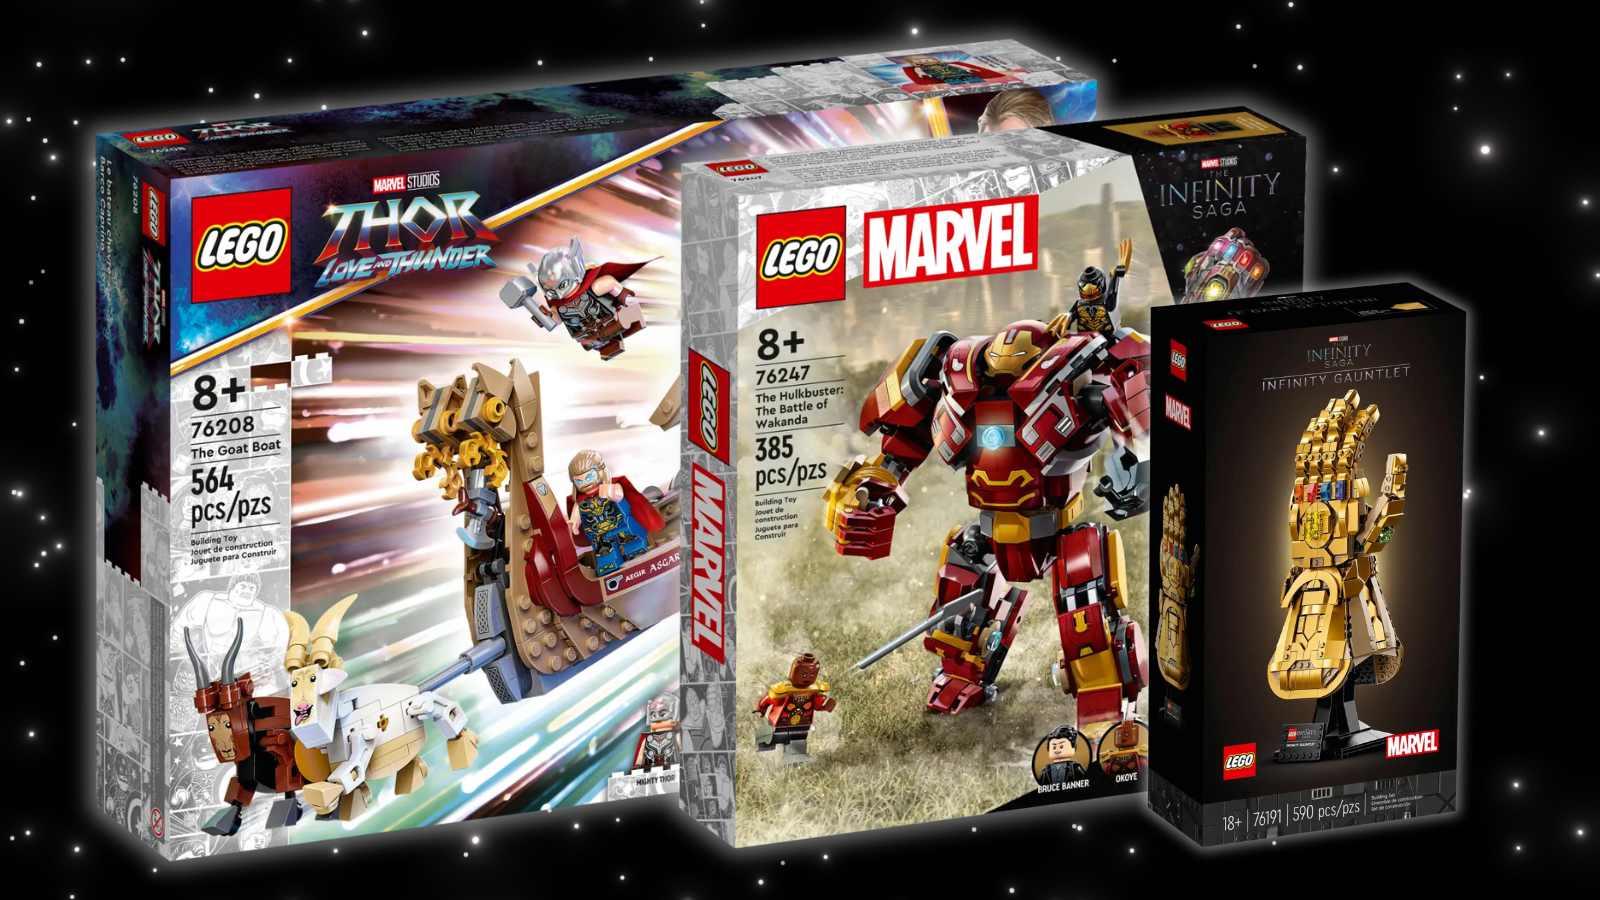 The LEGO Marvel sets discounted at Best Buy